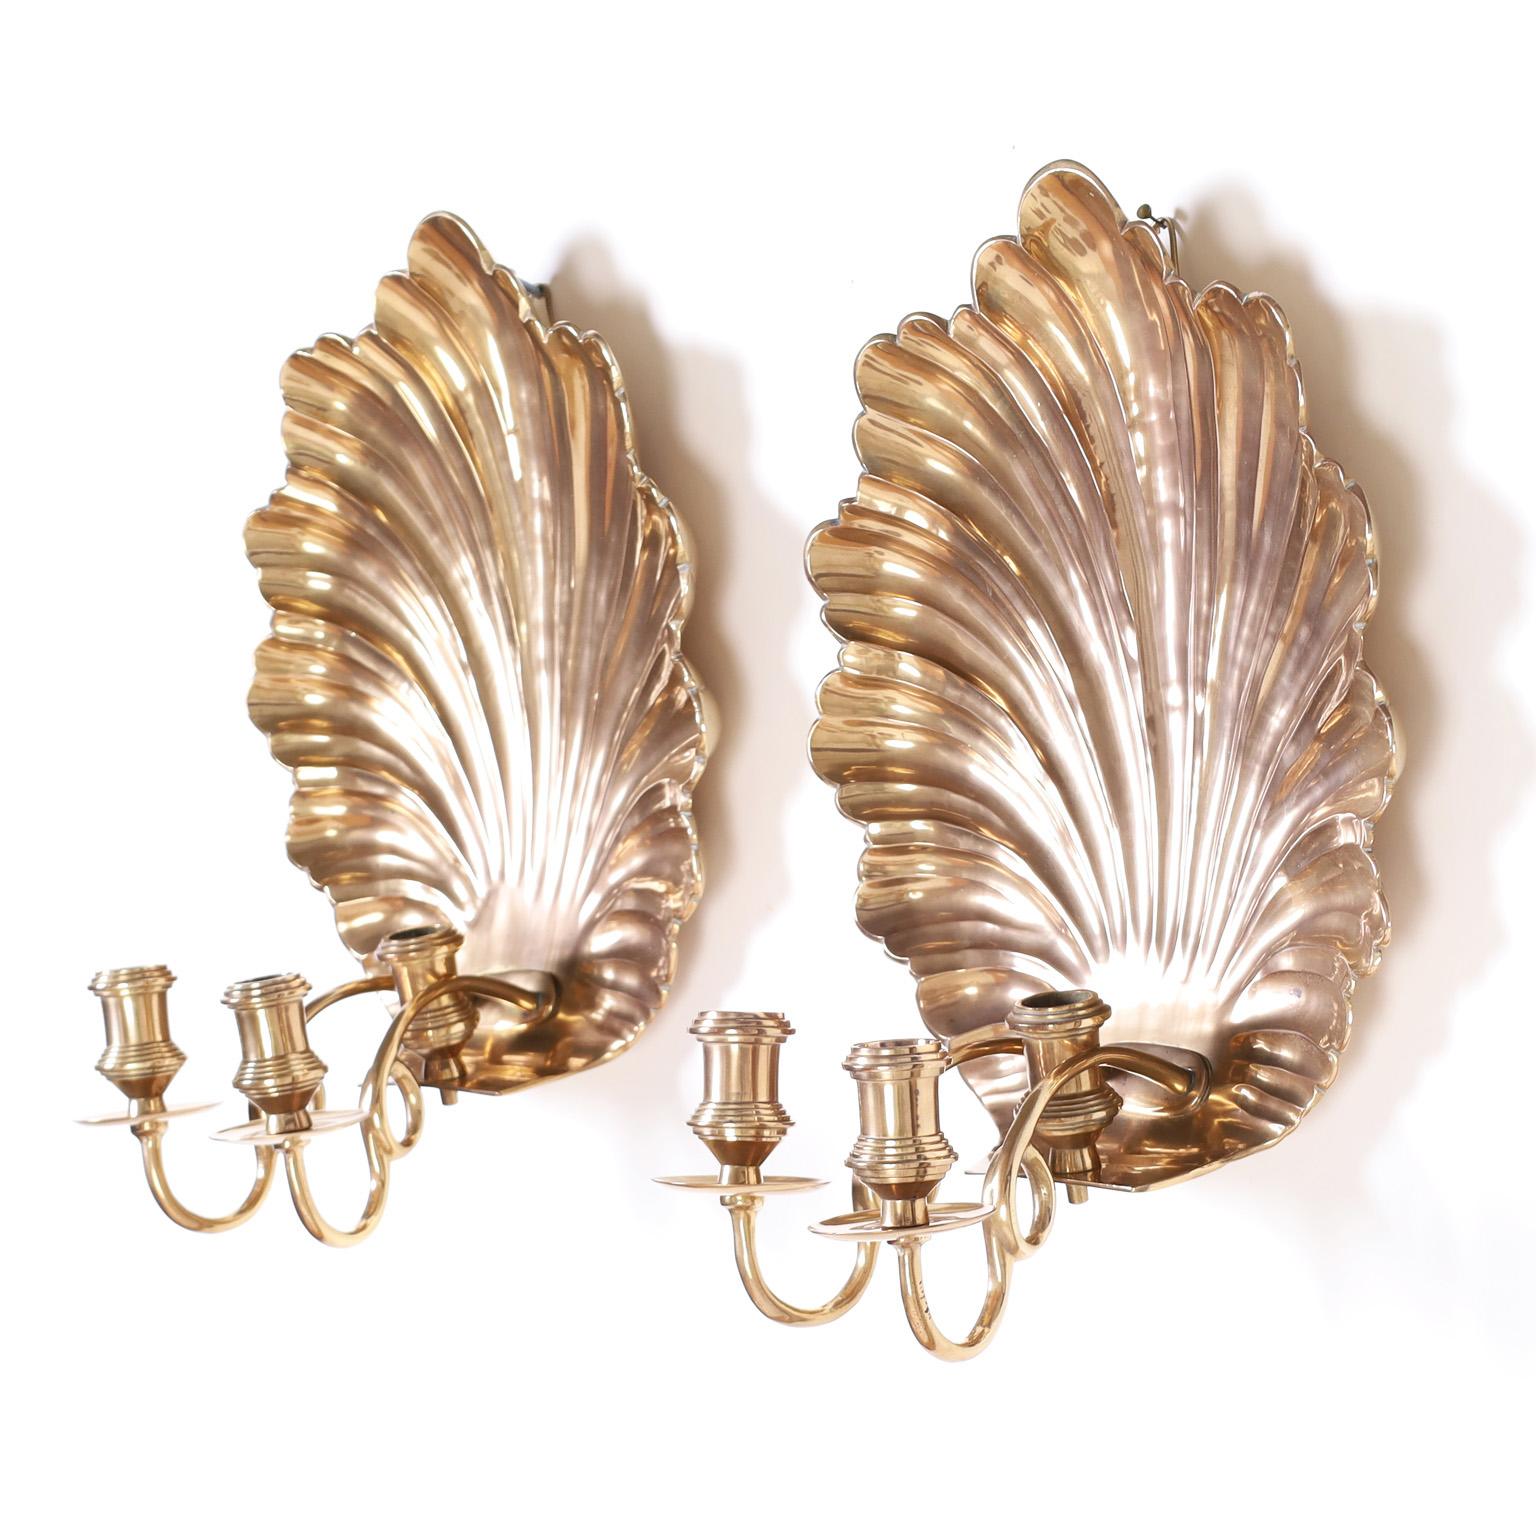 Standout pair of British colonial wall sconces with cast brass seashells and three turned brass candle cups. Hand polished and lacquered for easy care.